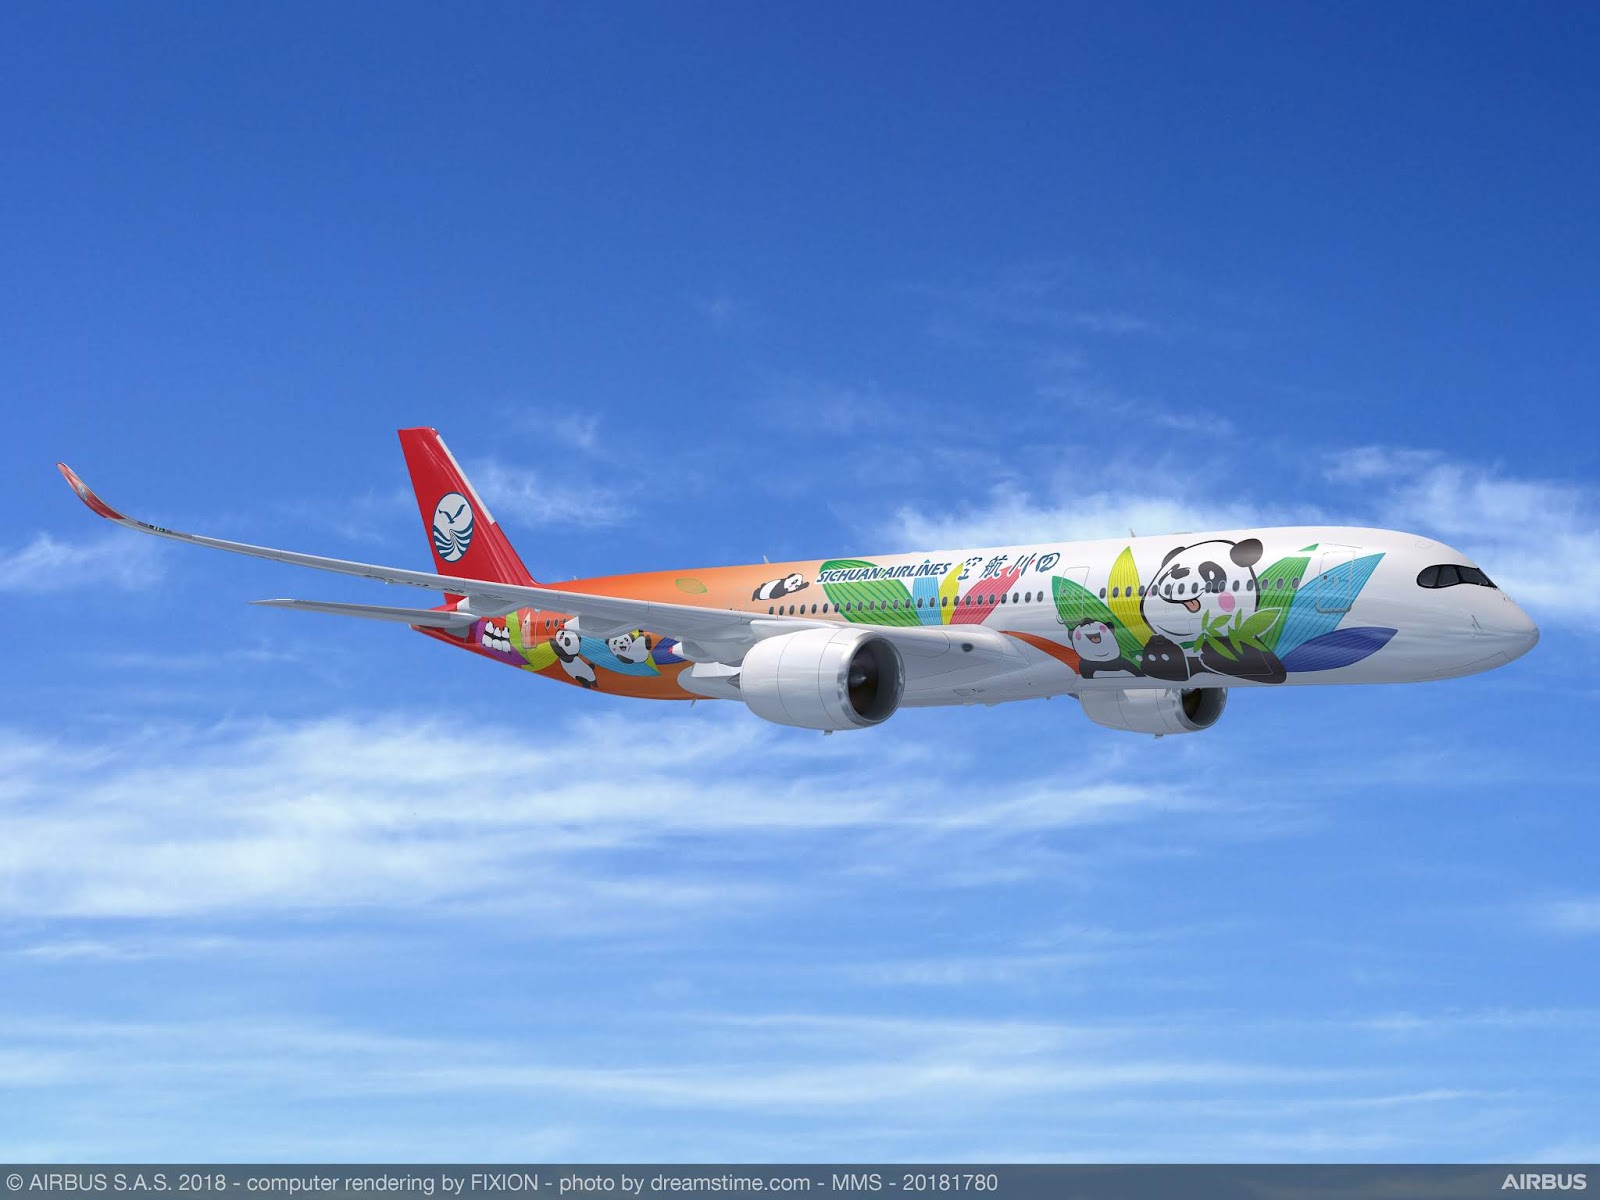 Hlcopters Magazine Blog Sichuan Airlines Orders 10 Airbus A350 Xwbs Images, Photos, Reviews